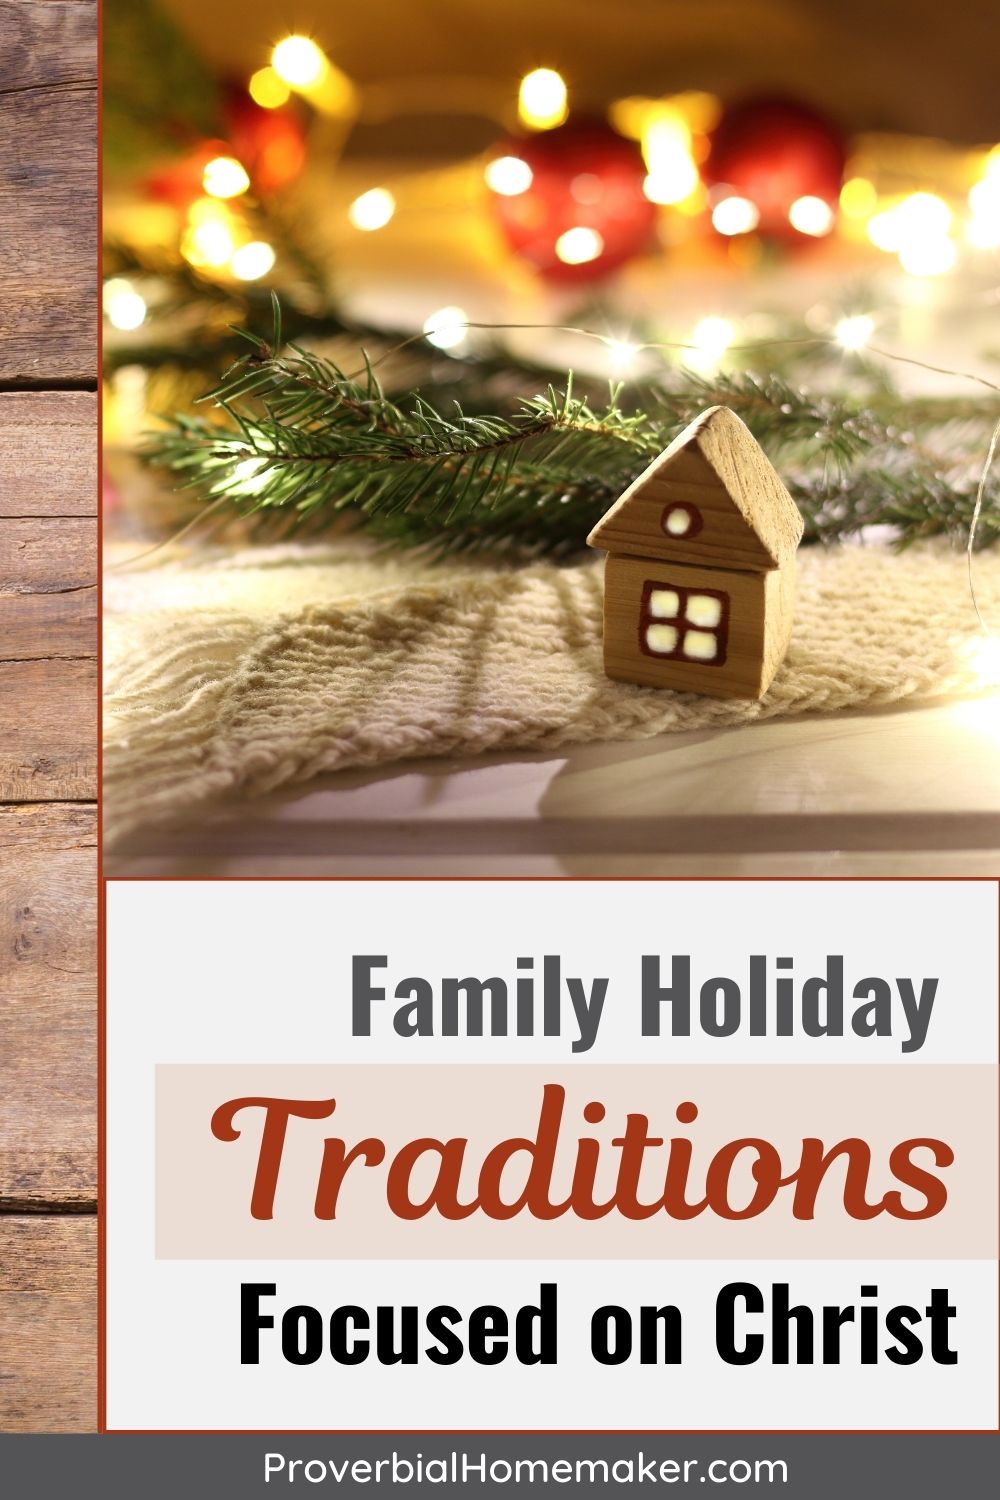 Family Holiday Traditions Focused on Christ